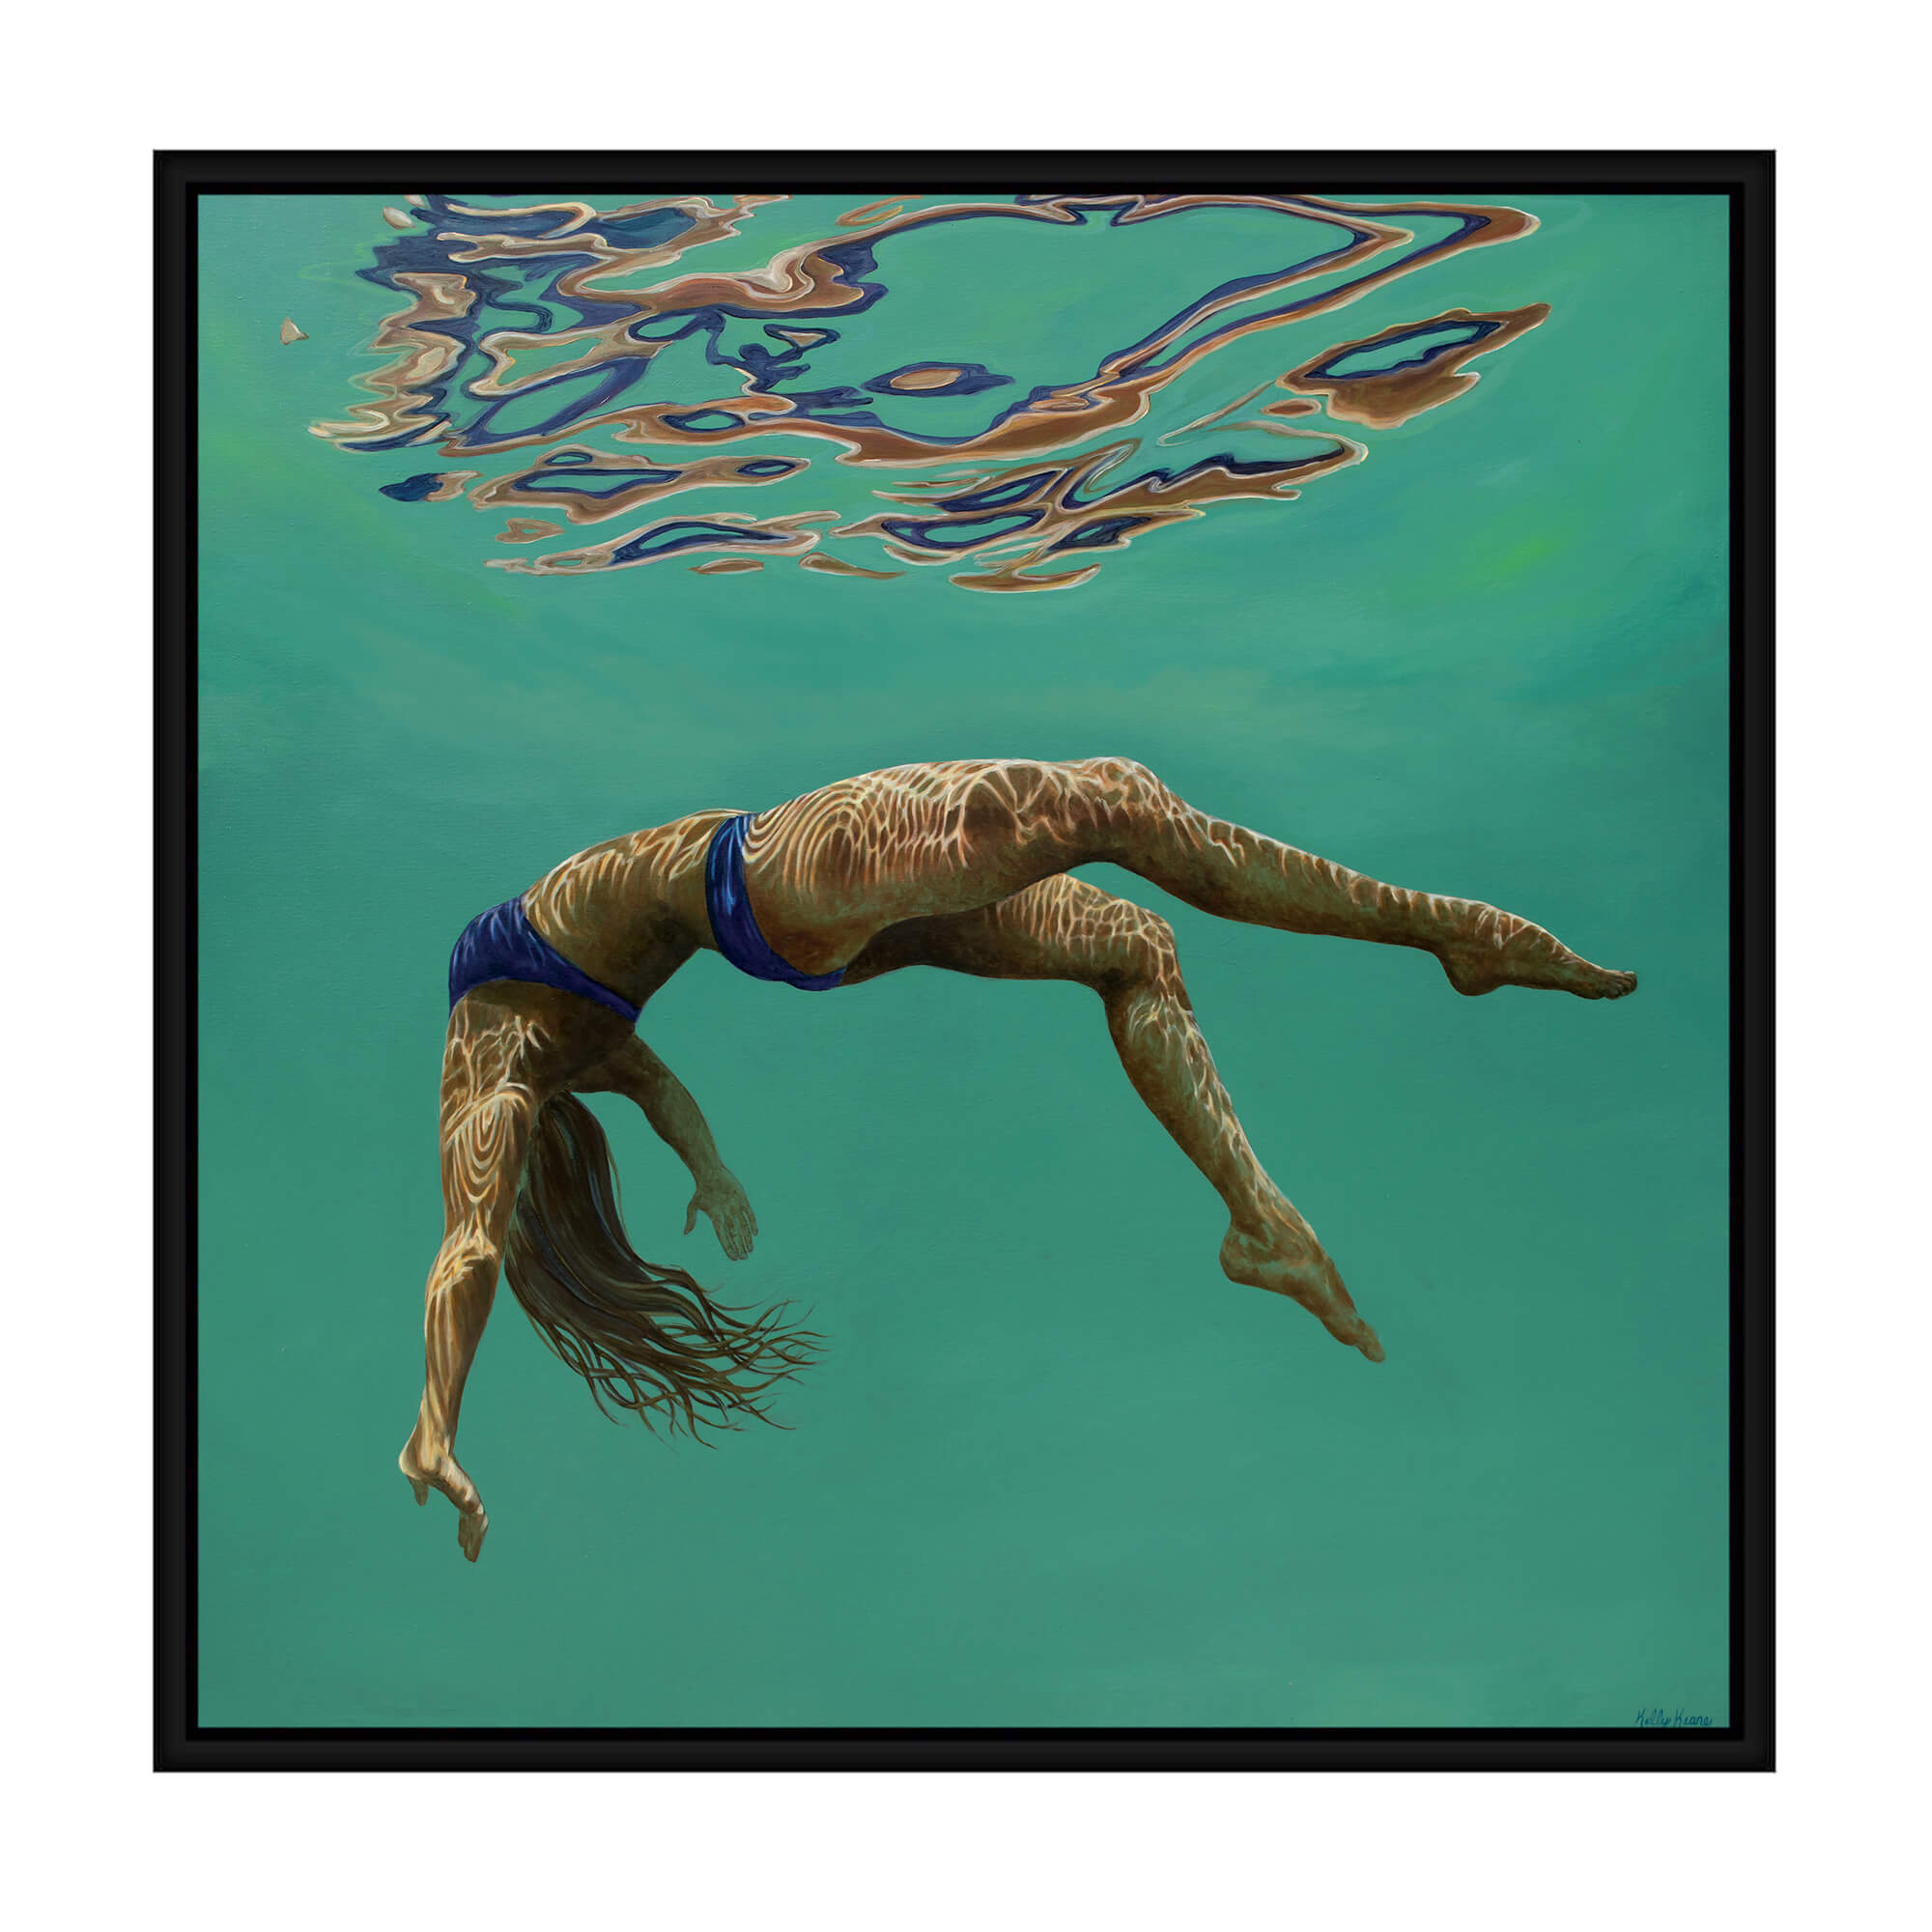 Canvas art print featuring a woman diving in a green hued water by Hawaii artist Kelly Keane